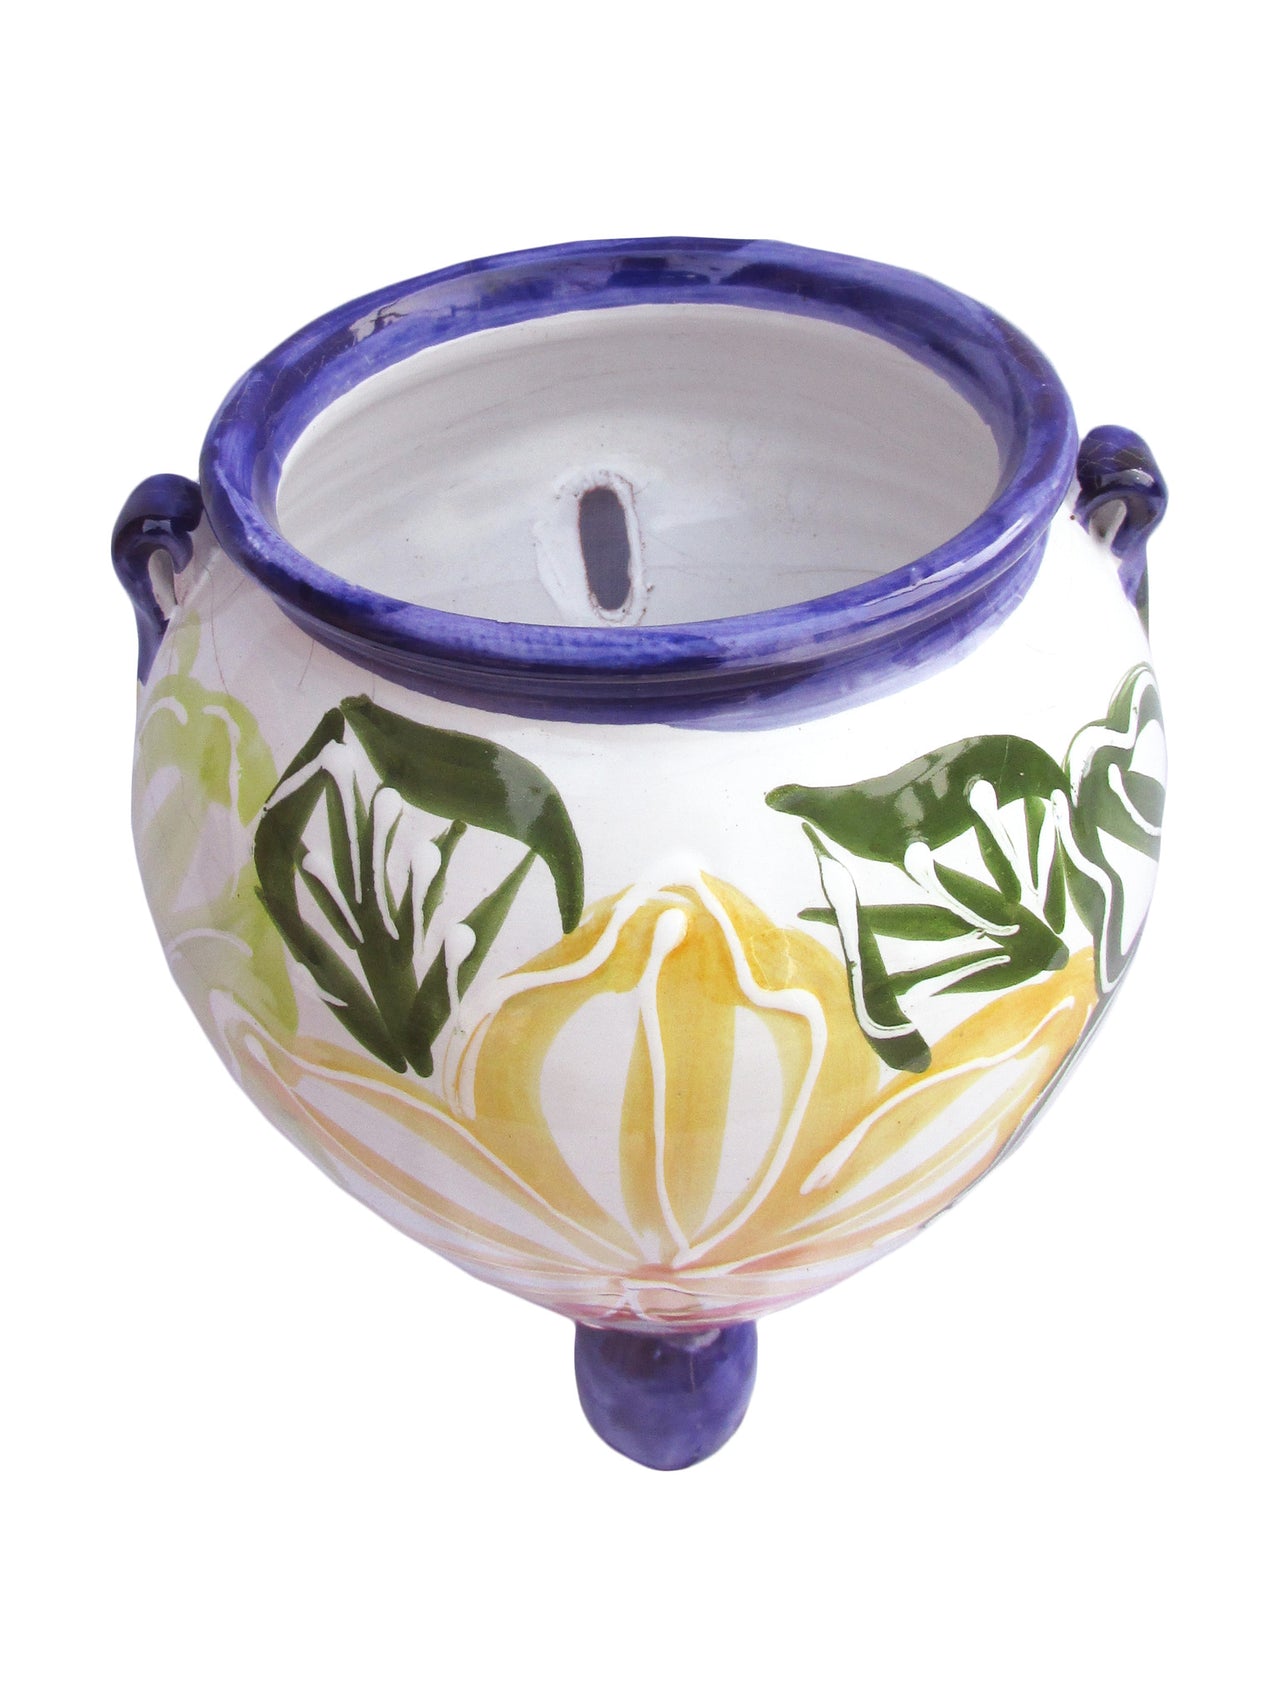 Wall Planter - Spanish Orza (Flor) - Hand Painted in Spain